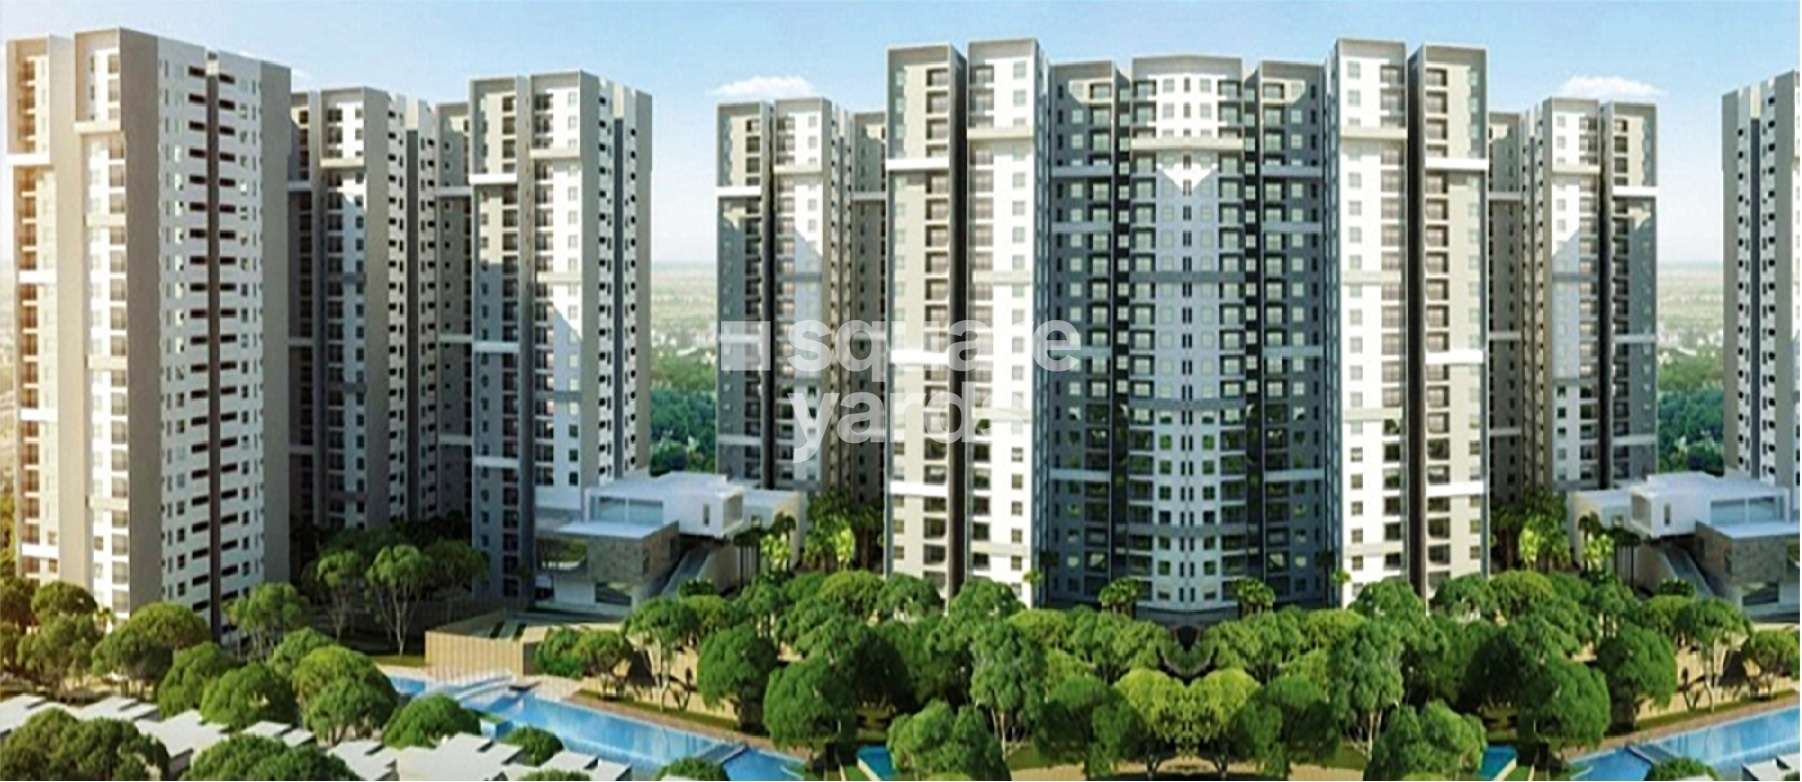 sobha rain forest phase 3 wing 5 and 6 tower view6